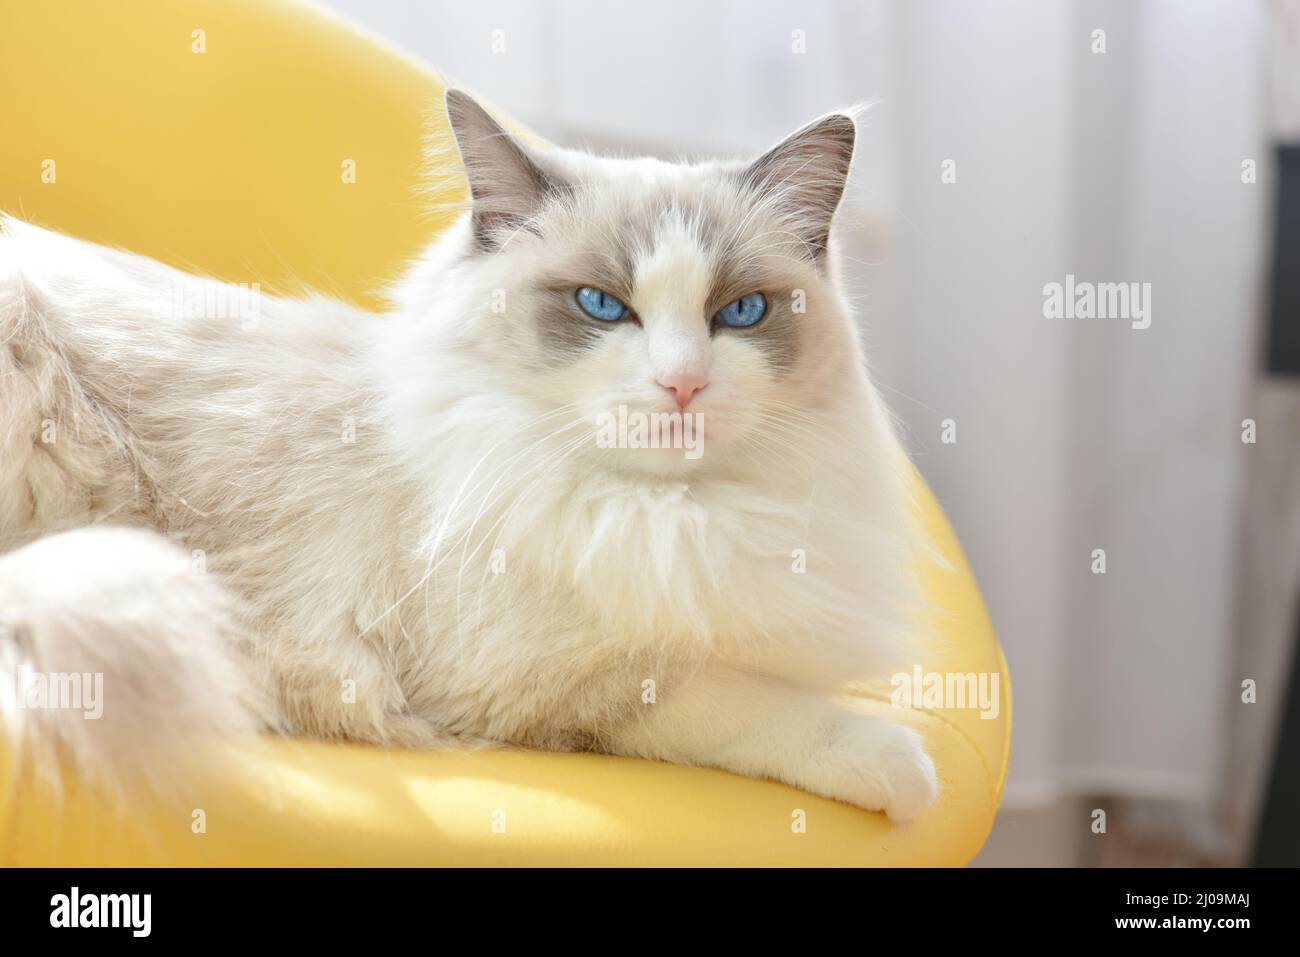 Tired Distant, Angry Suspicious Cat. Cute Beautiful White Cat with Blue  Eyes. Fluffy White Fur Stock Image - Image of mammal, kitten: 240967325